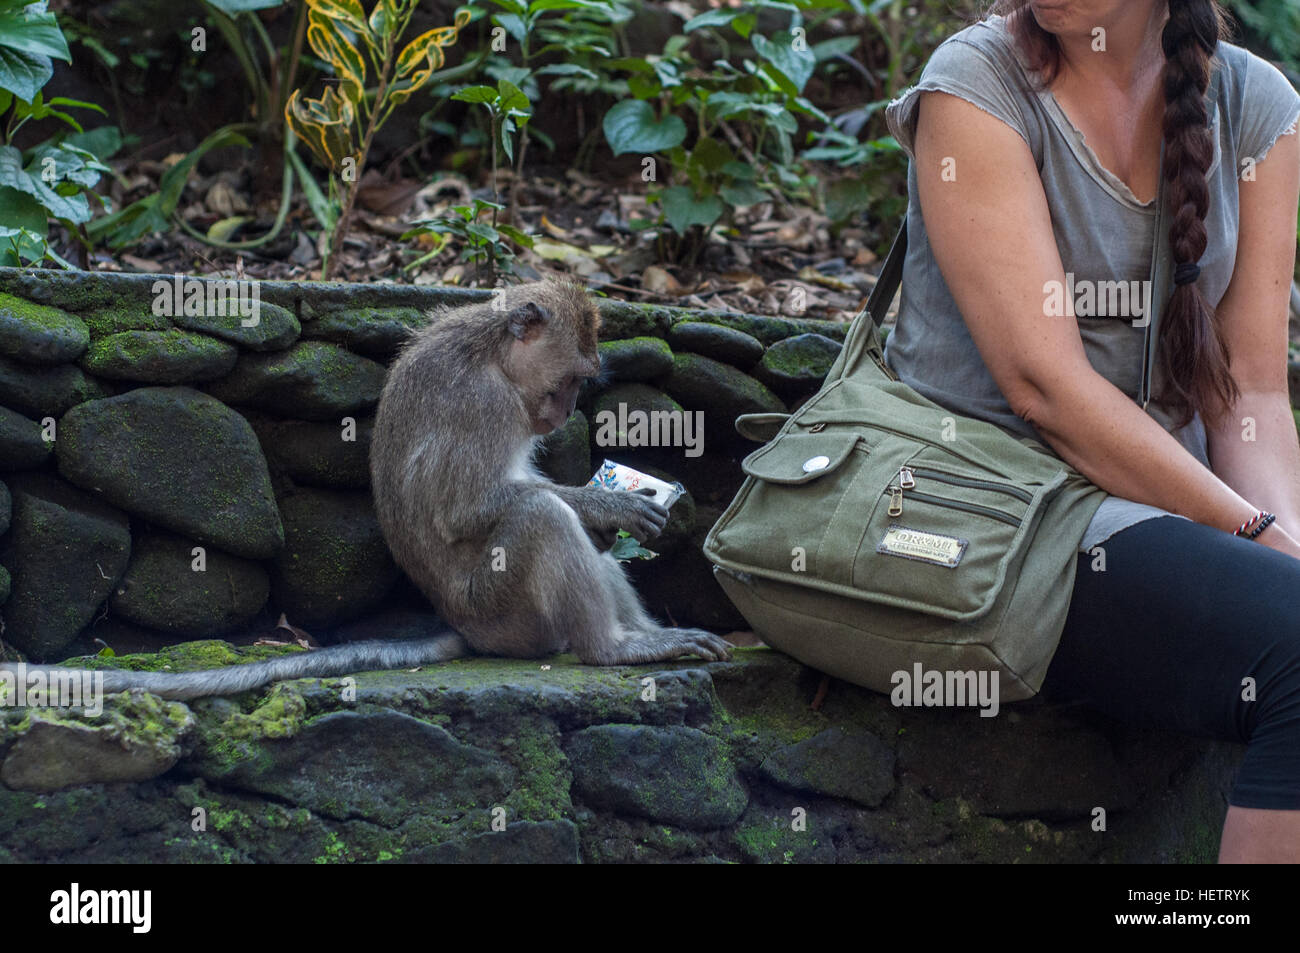 Monkey in sacred monkey forest trying to steal something from a tourist Stock Photo